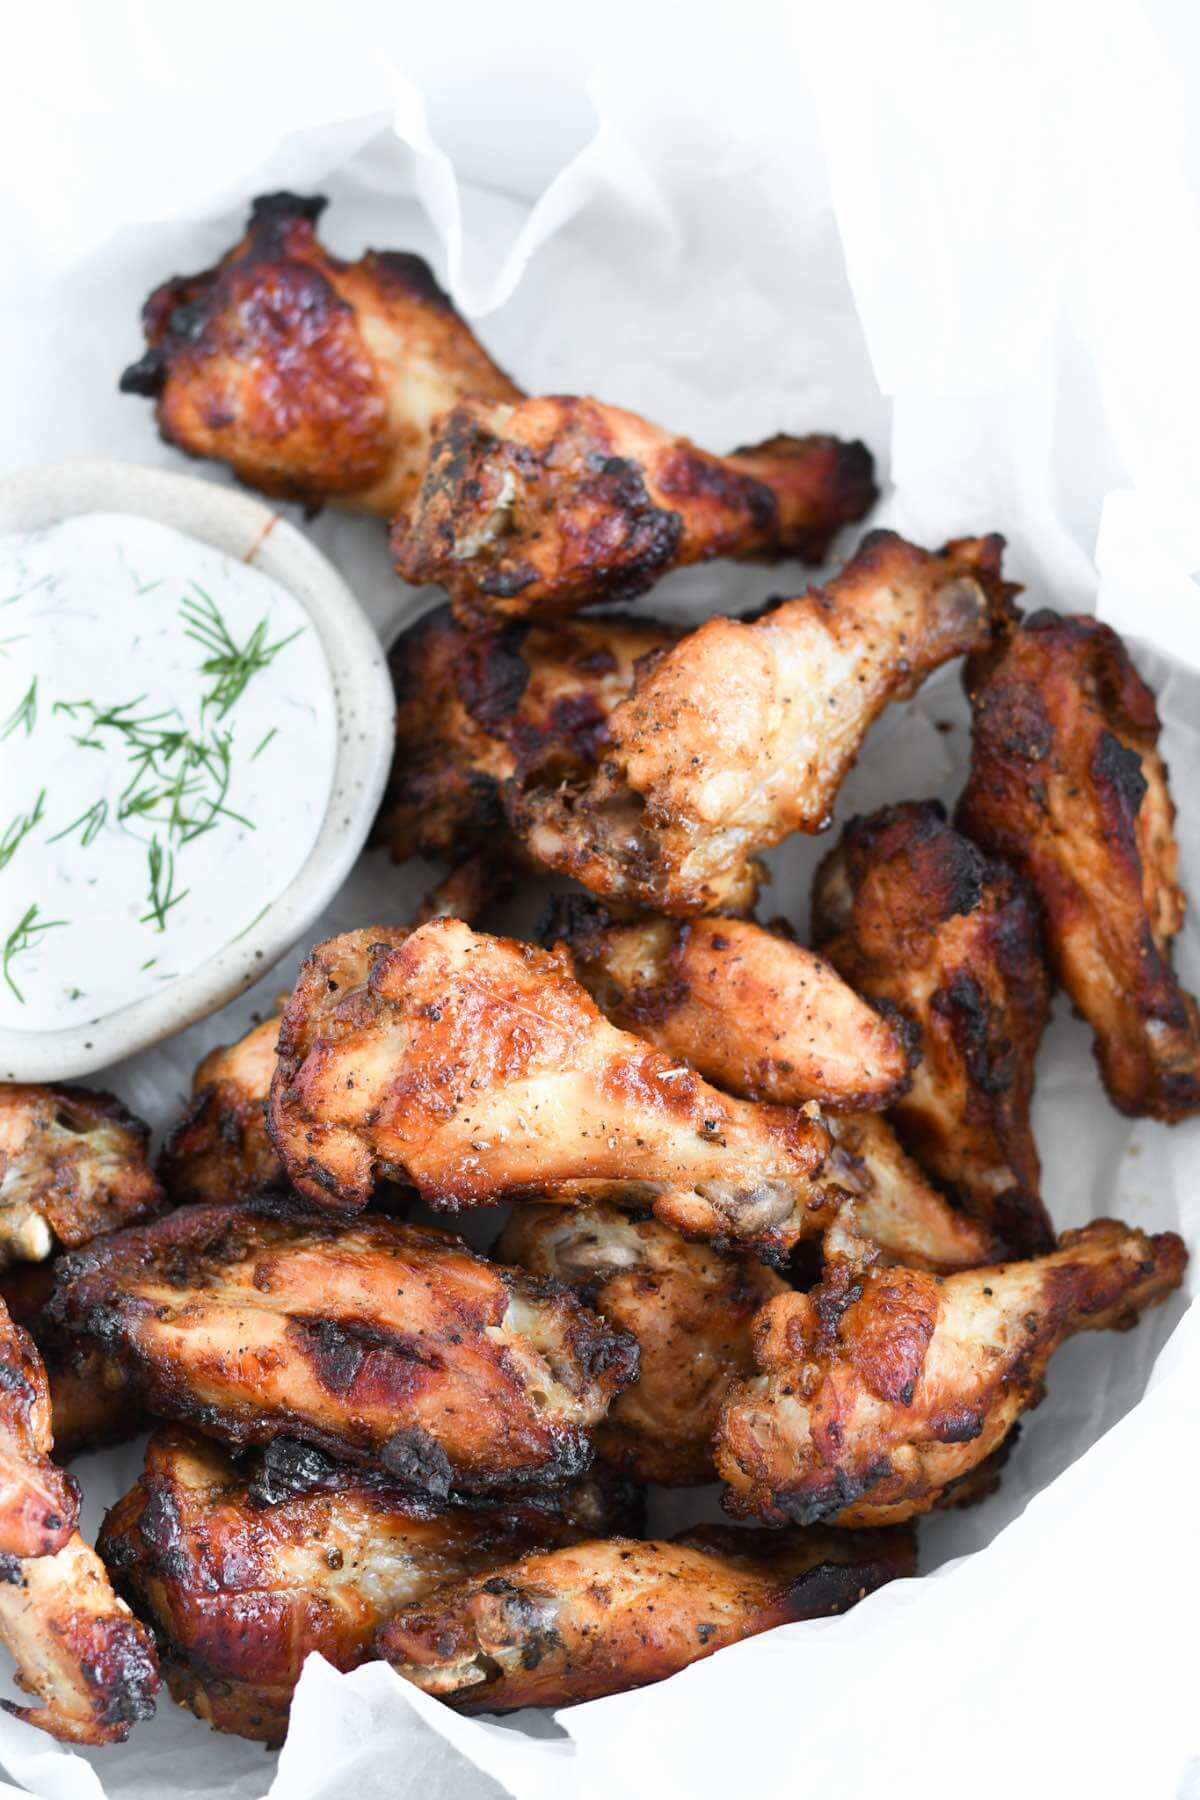 Greek chicken wings served with creamy ranch dill dip.